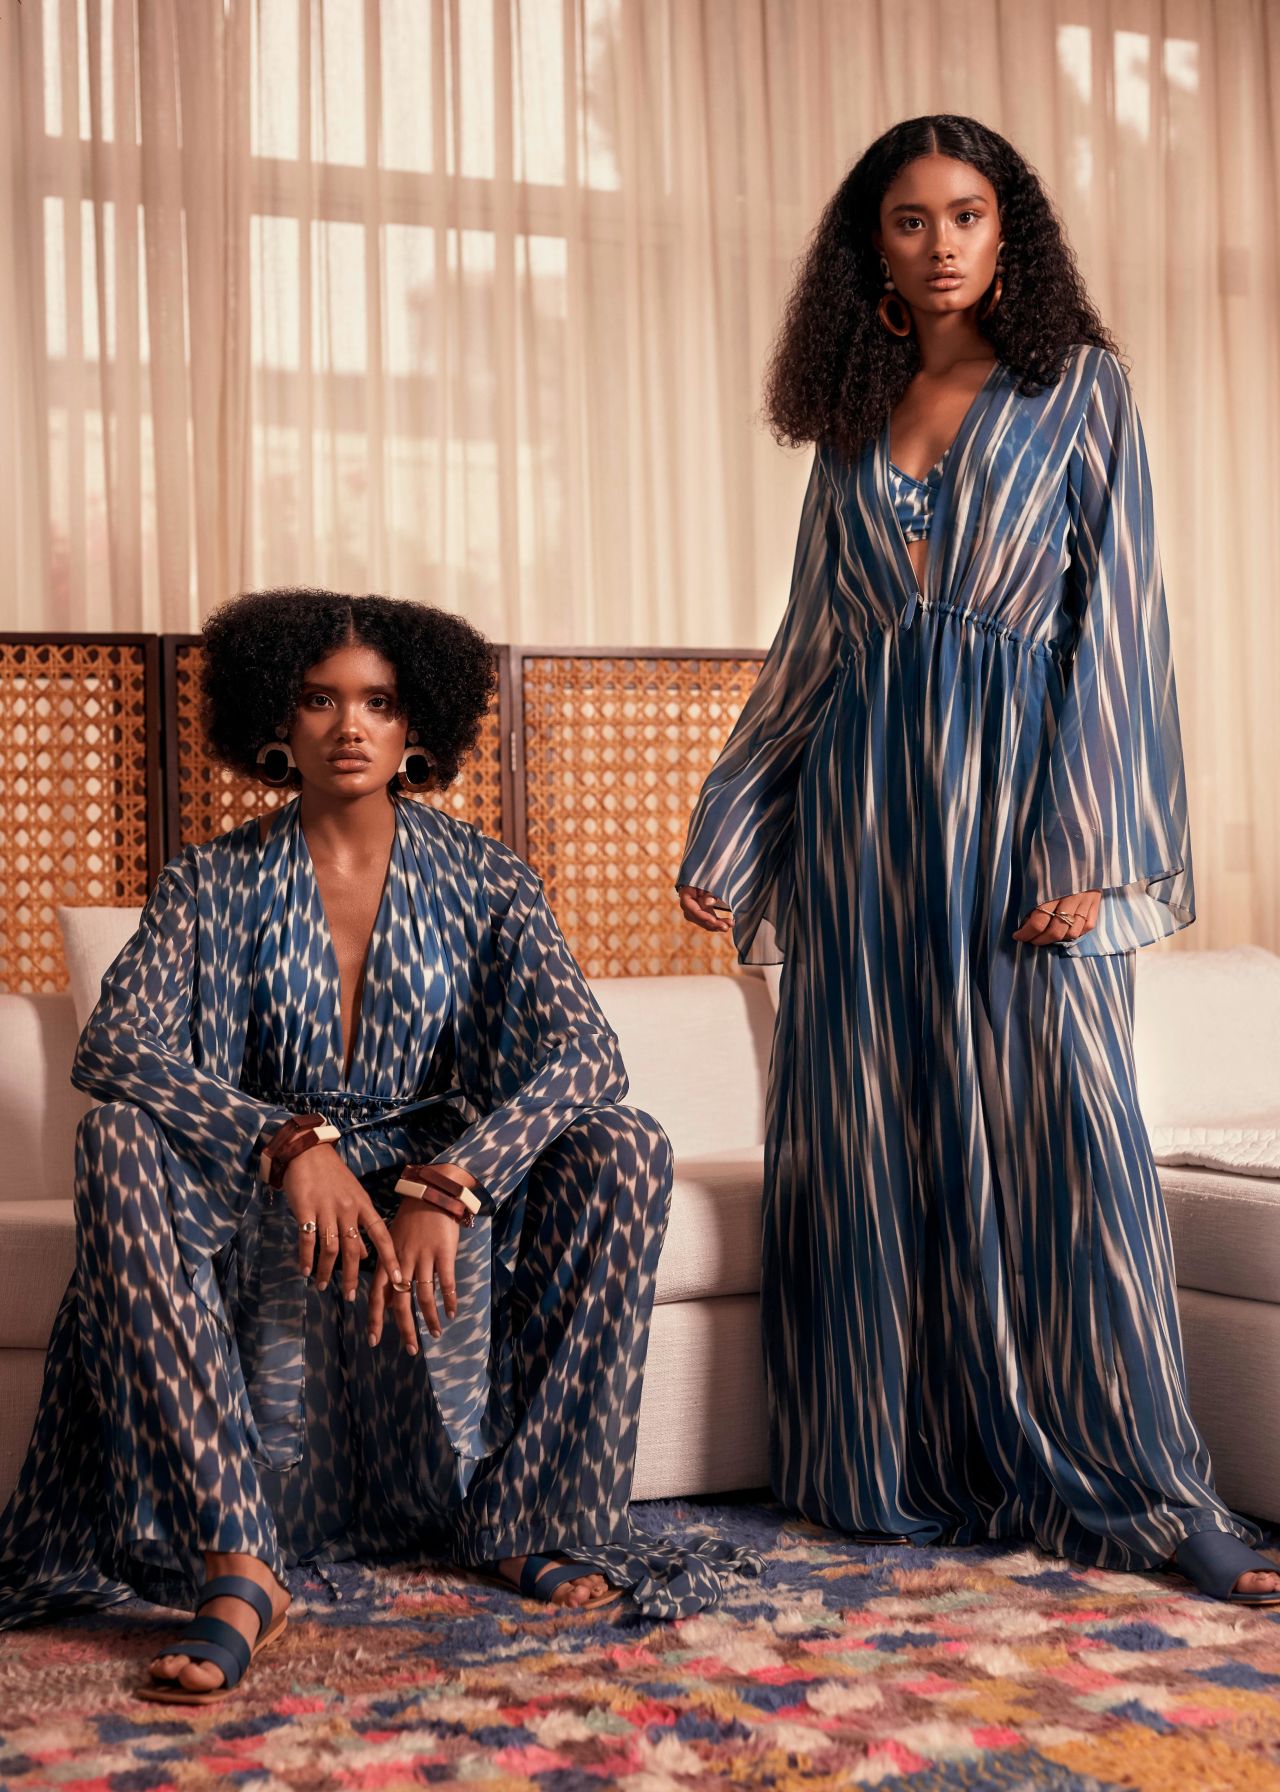 The Spring Summer 2020 Resort collection by Diarrablu.